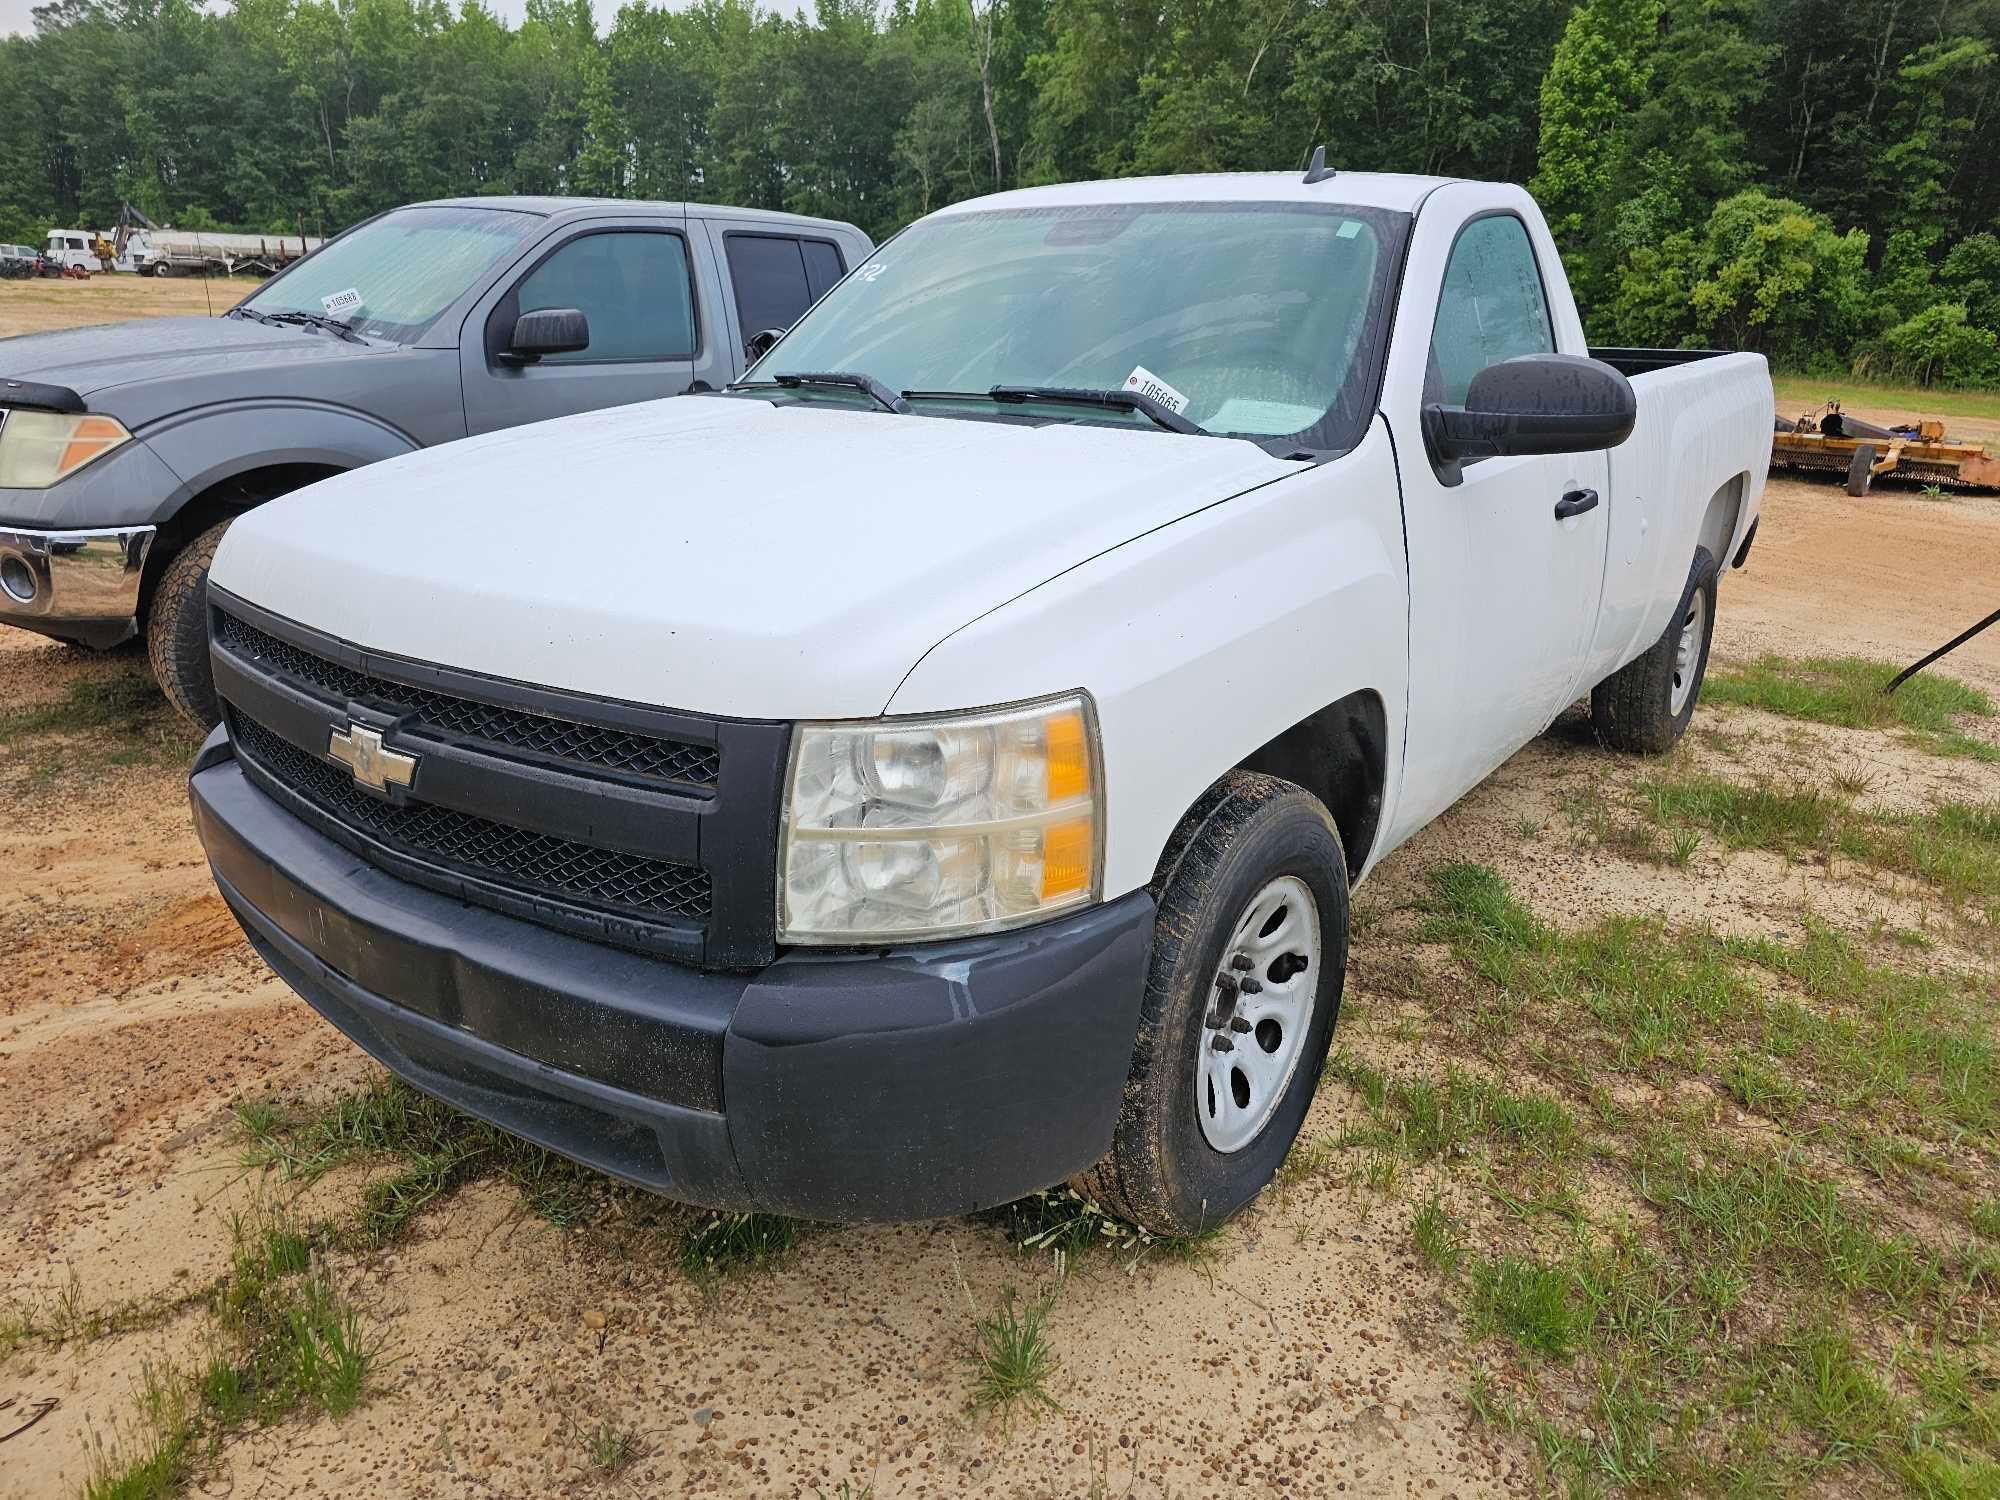 932 - 2008 CHEVY 1500 4WD TRUCK